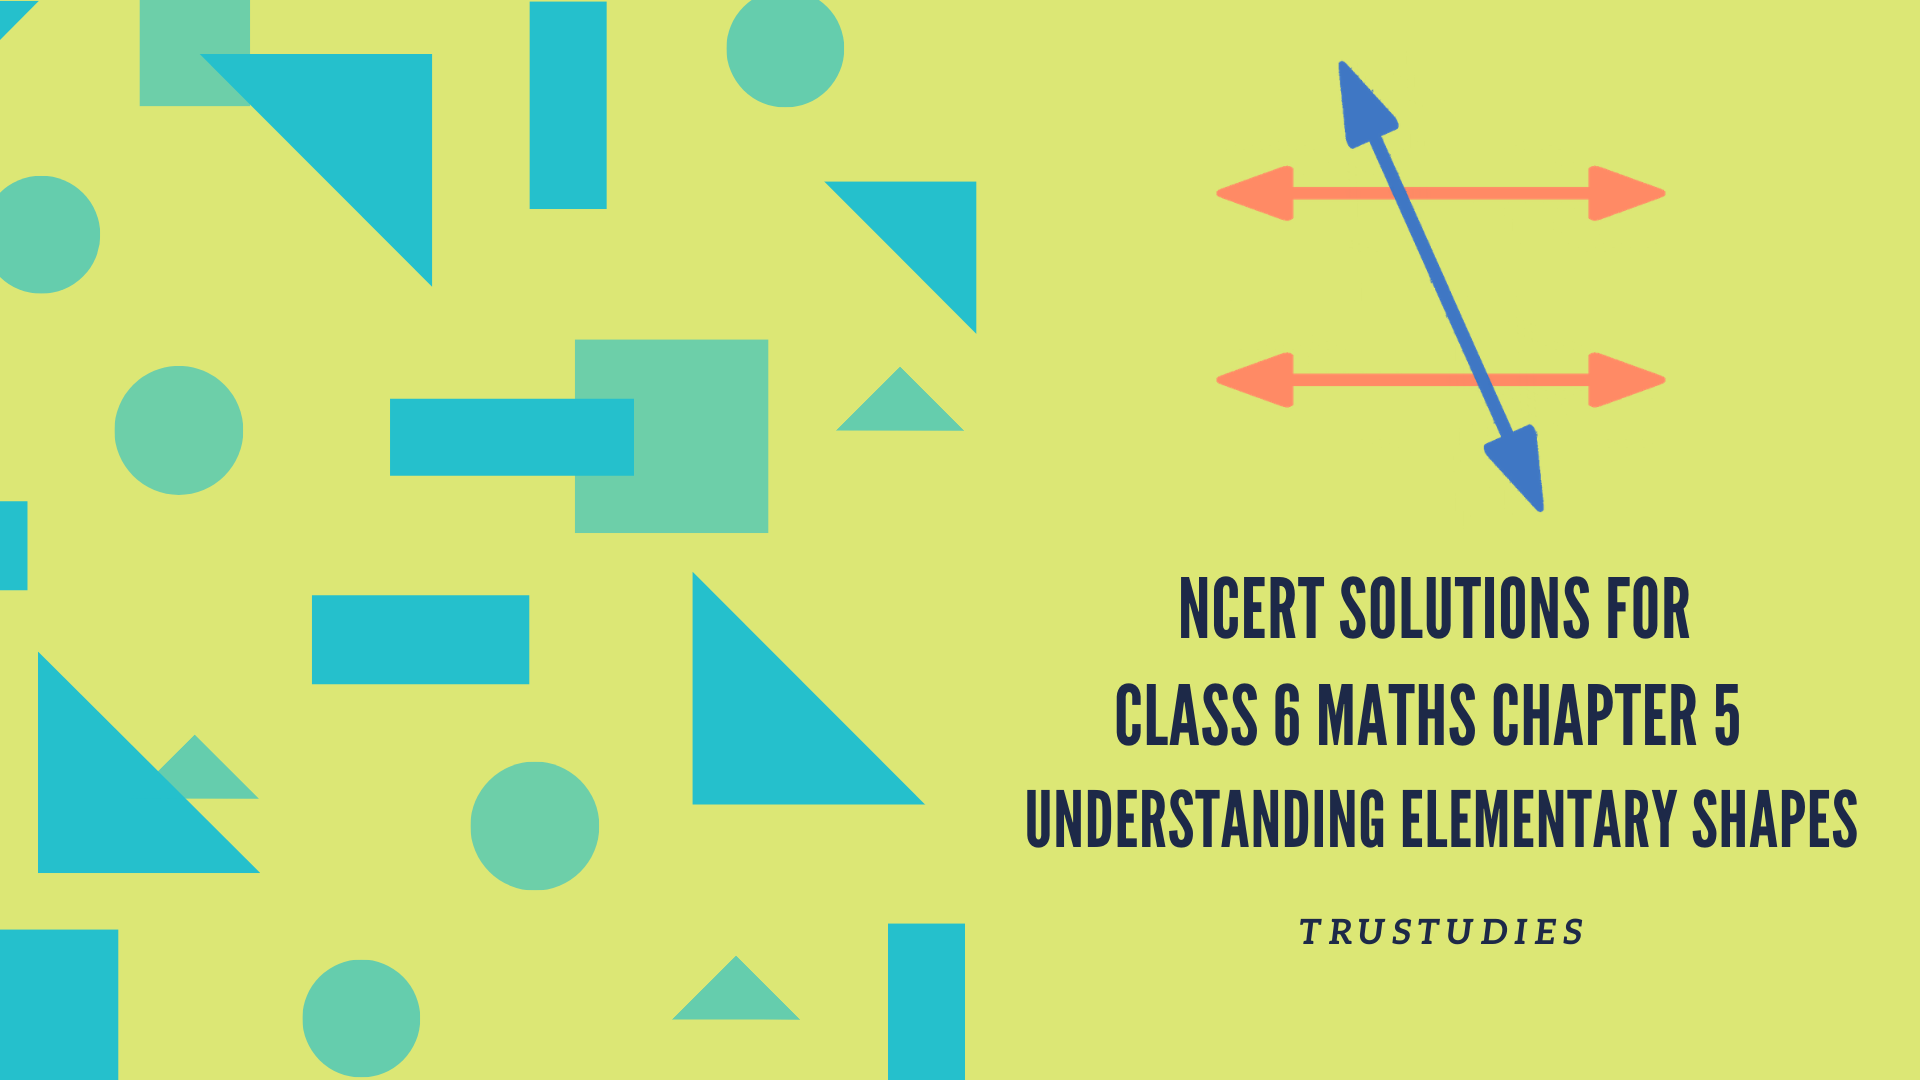 NCERT solutions for class 6 maths chapter 5 understanding elementary shapes banner image